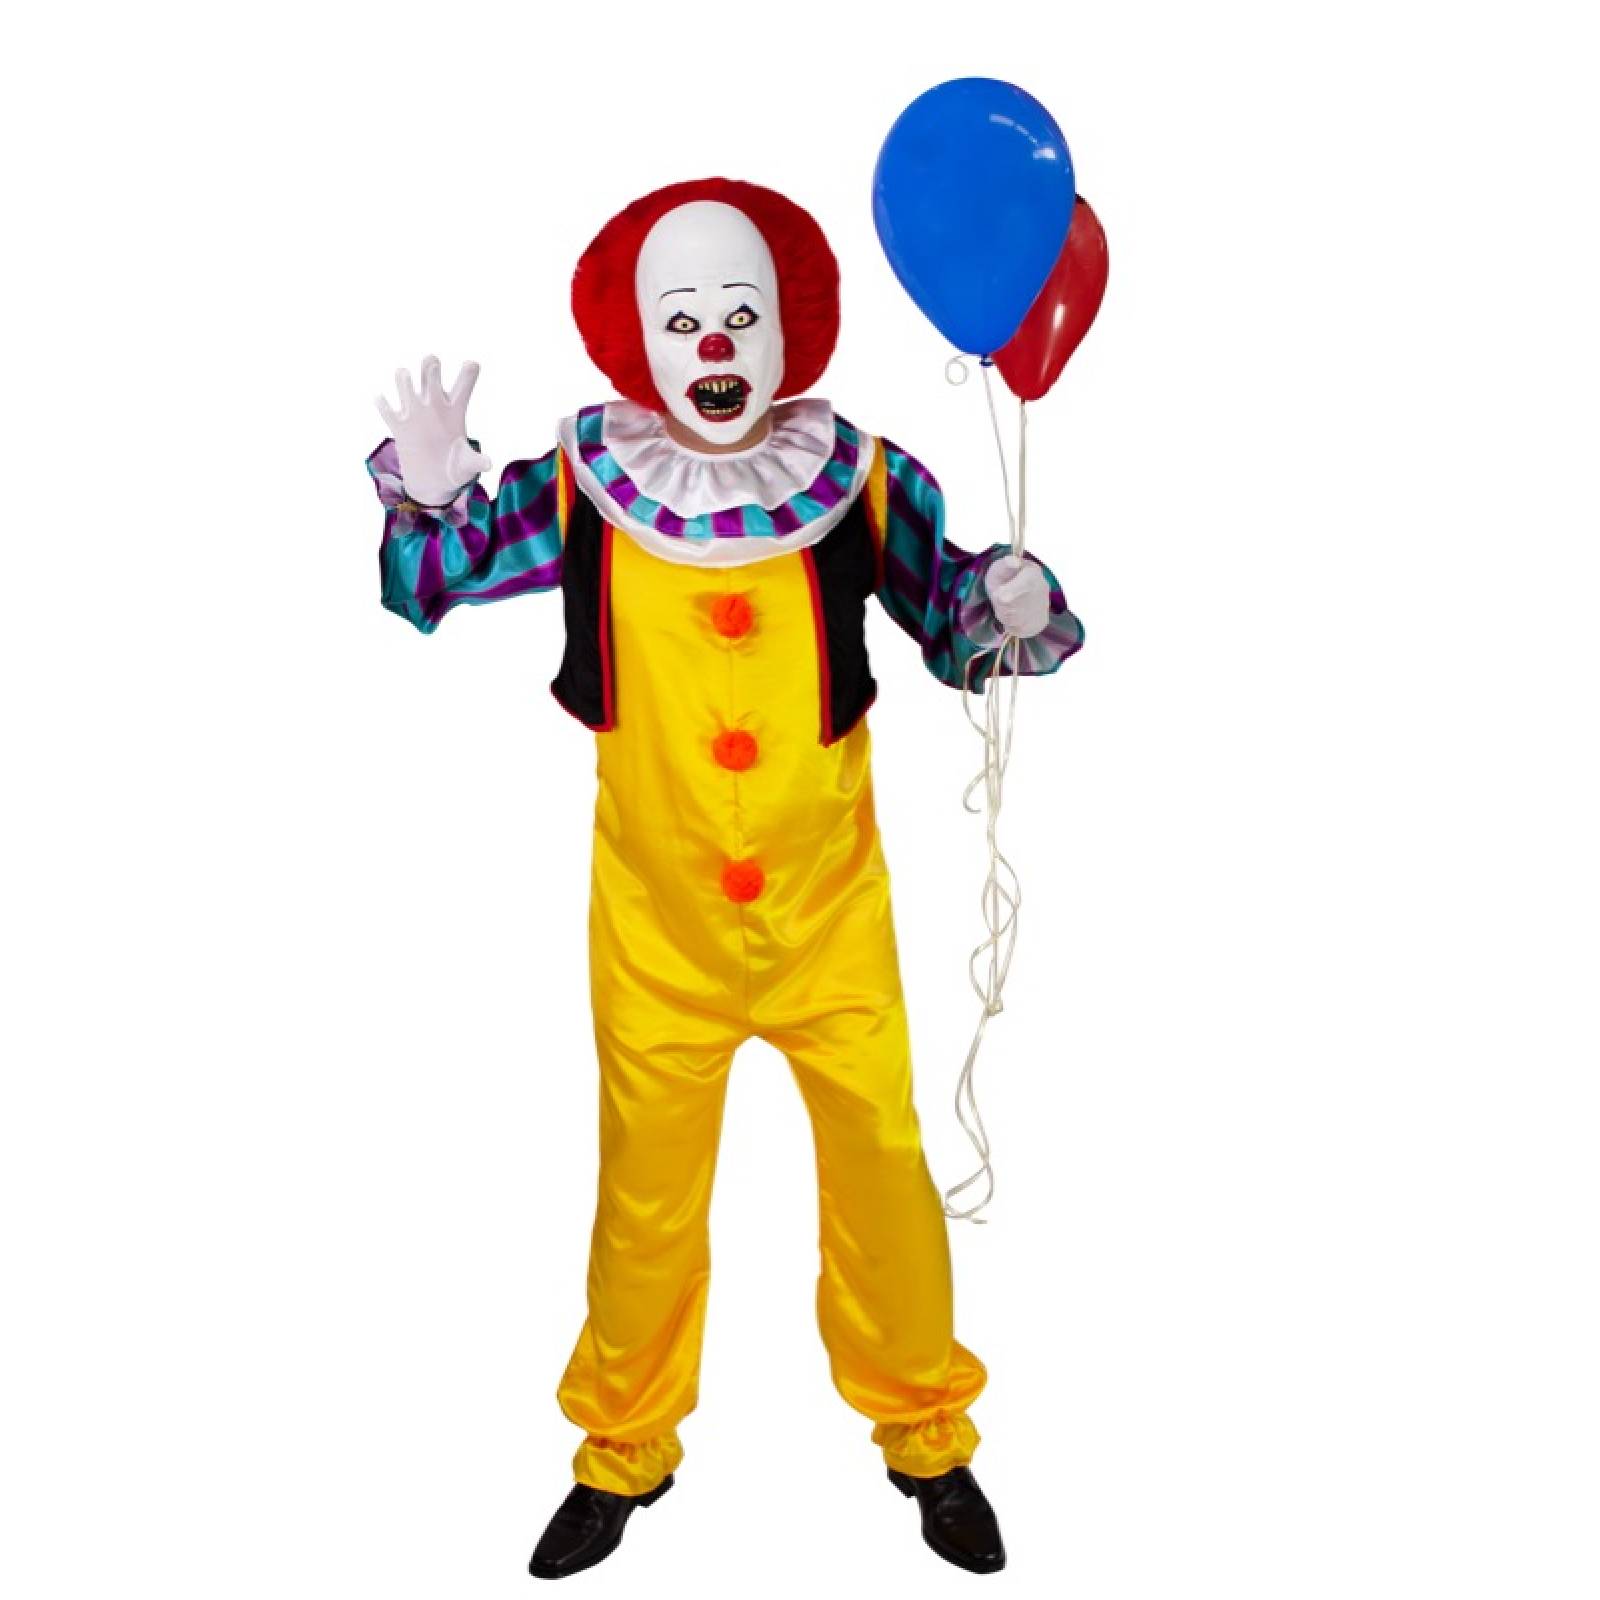 Disfraz de Pennywise (1990) para adulto - Talla M - Pennywise costume (1990) for adults - Size M